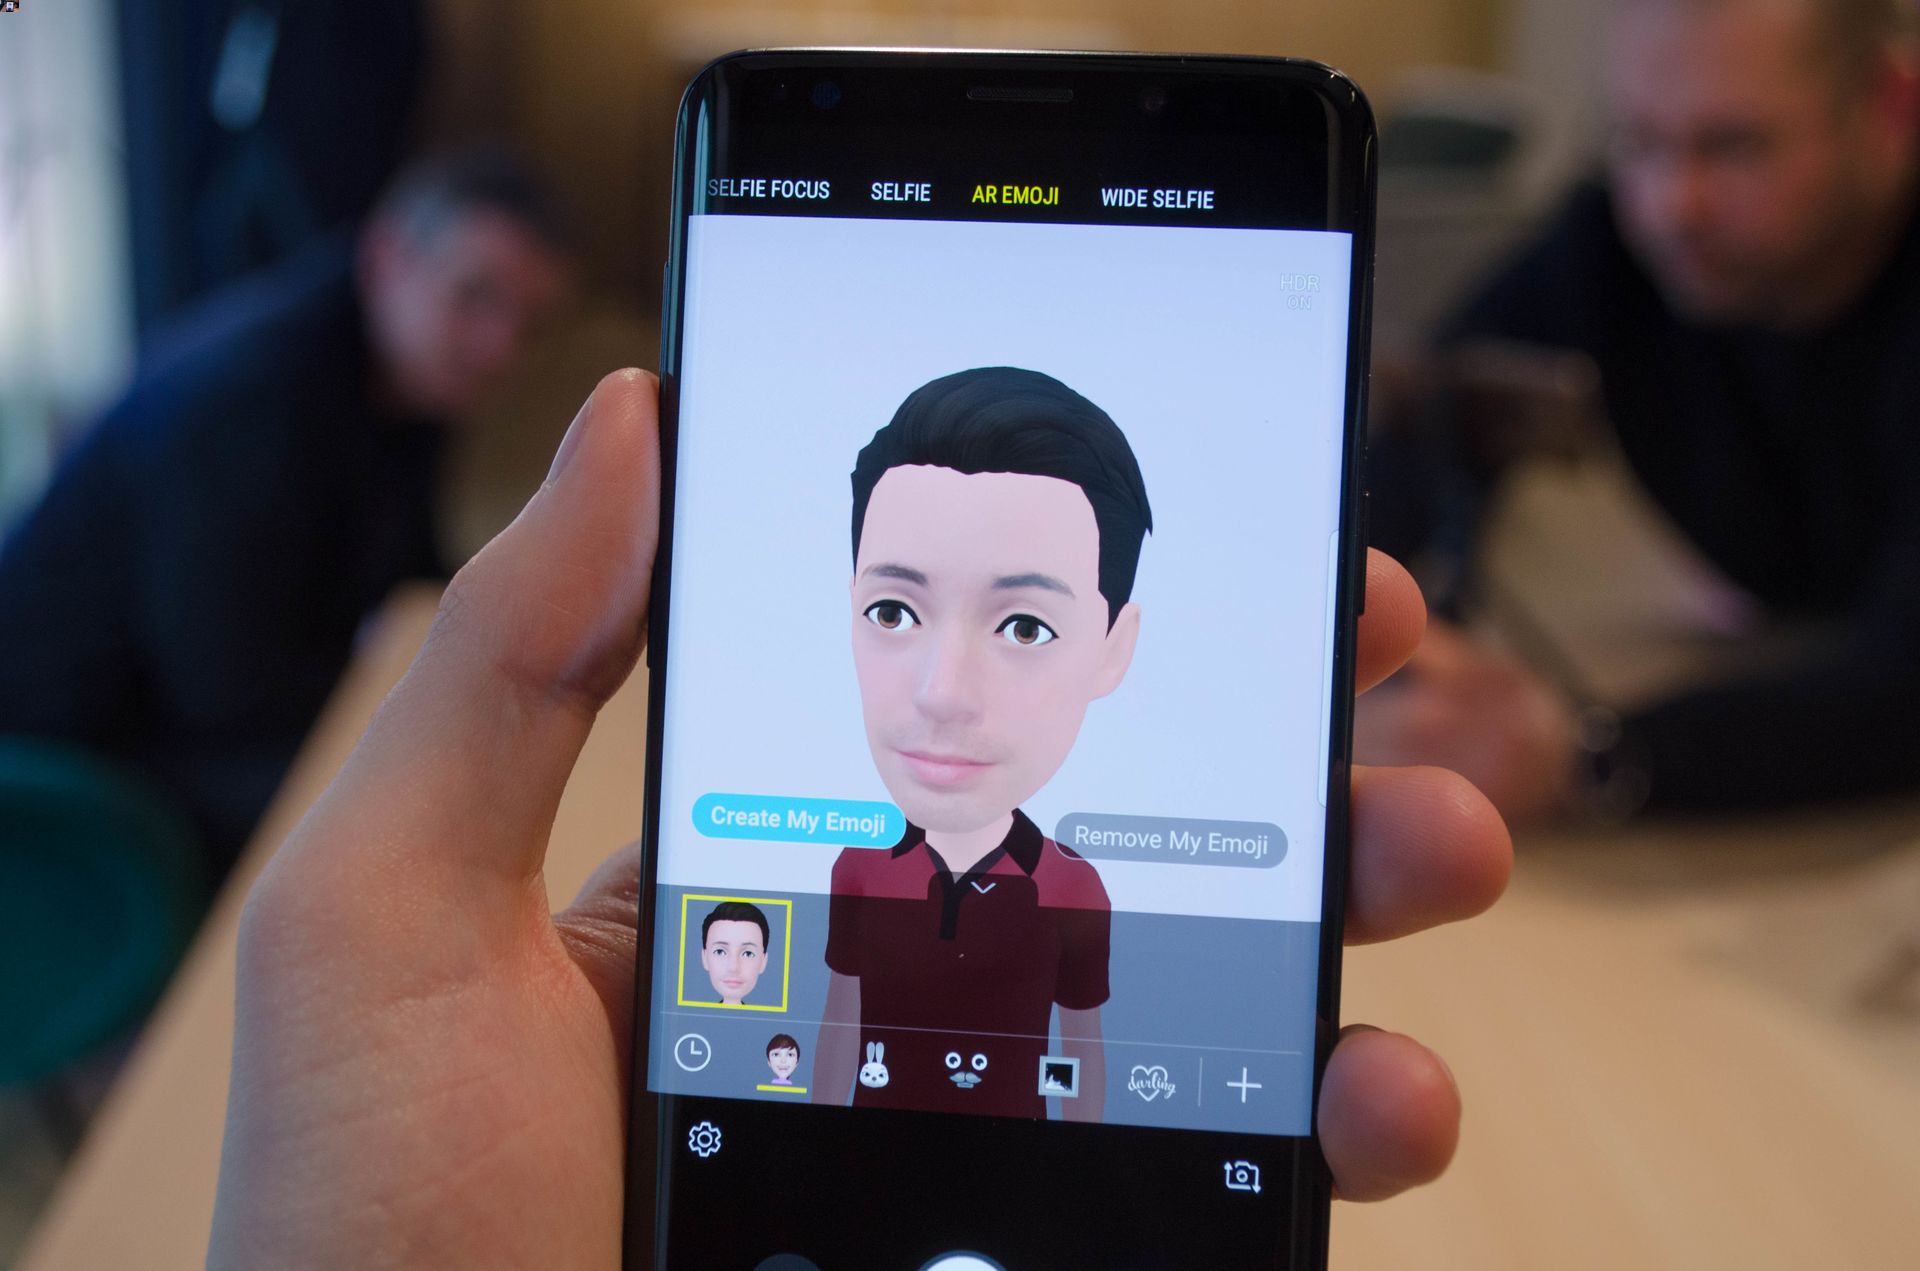 how-samsung-brought-ar-emojis-to-life-in-the-galaxy-s9